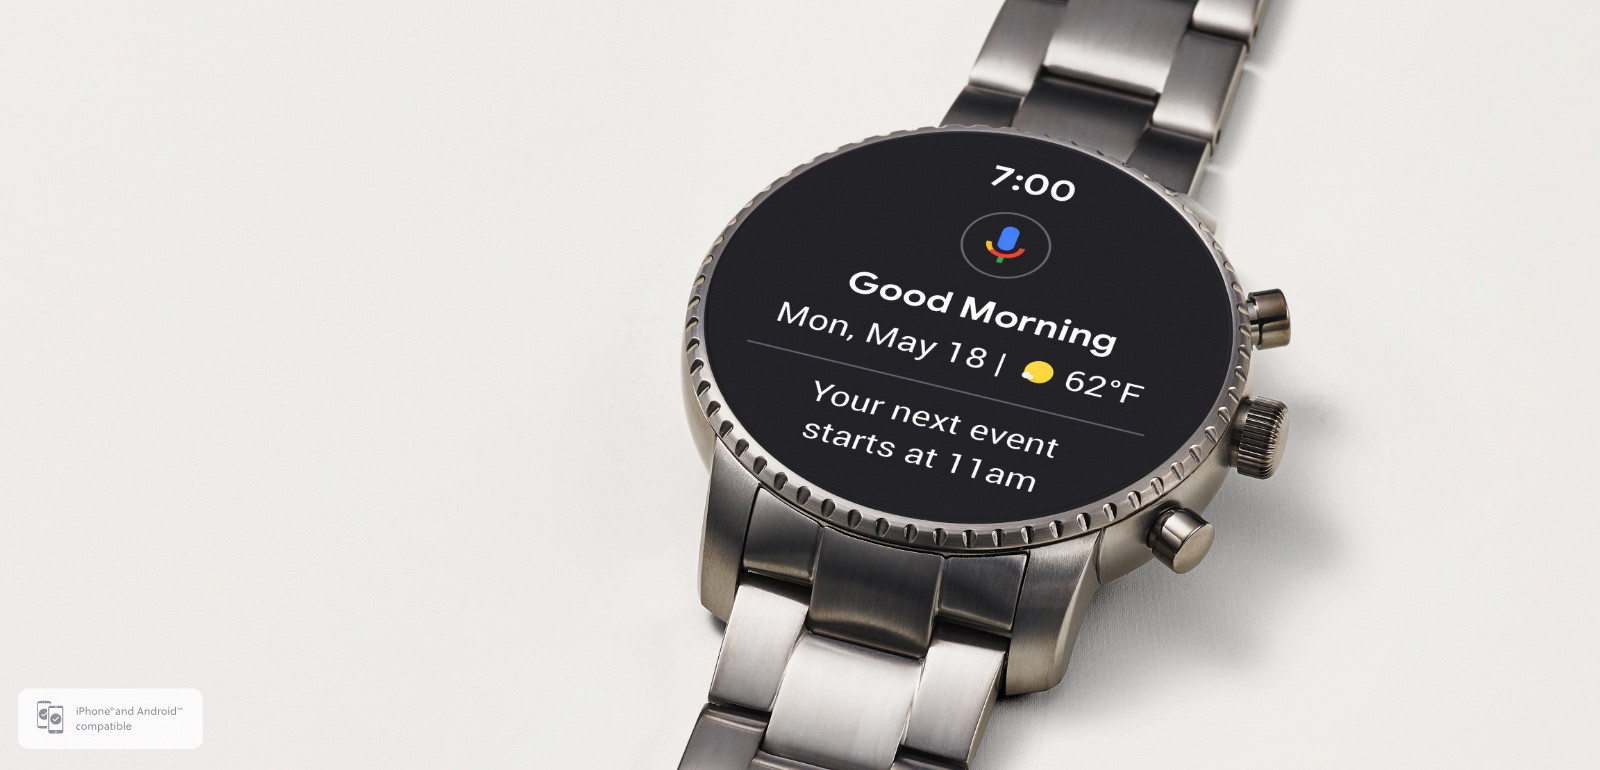 is the fossil smartwatch compatible with iphone